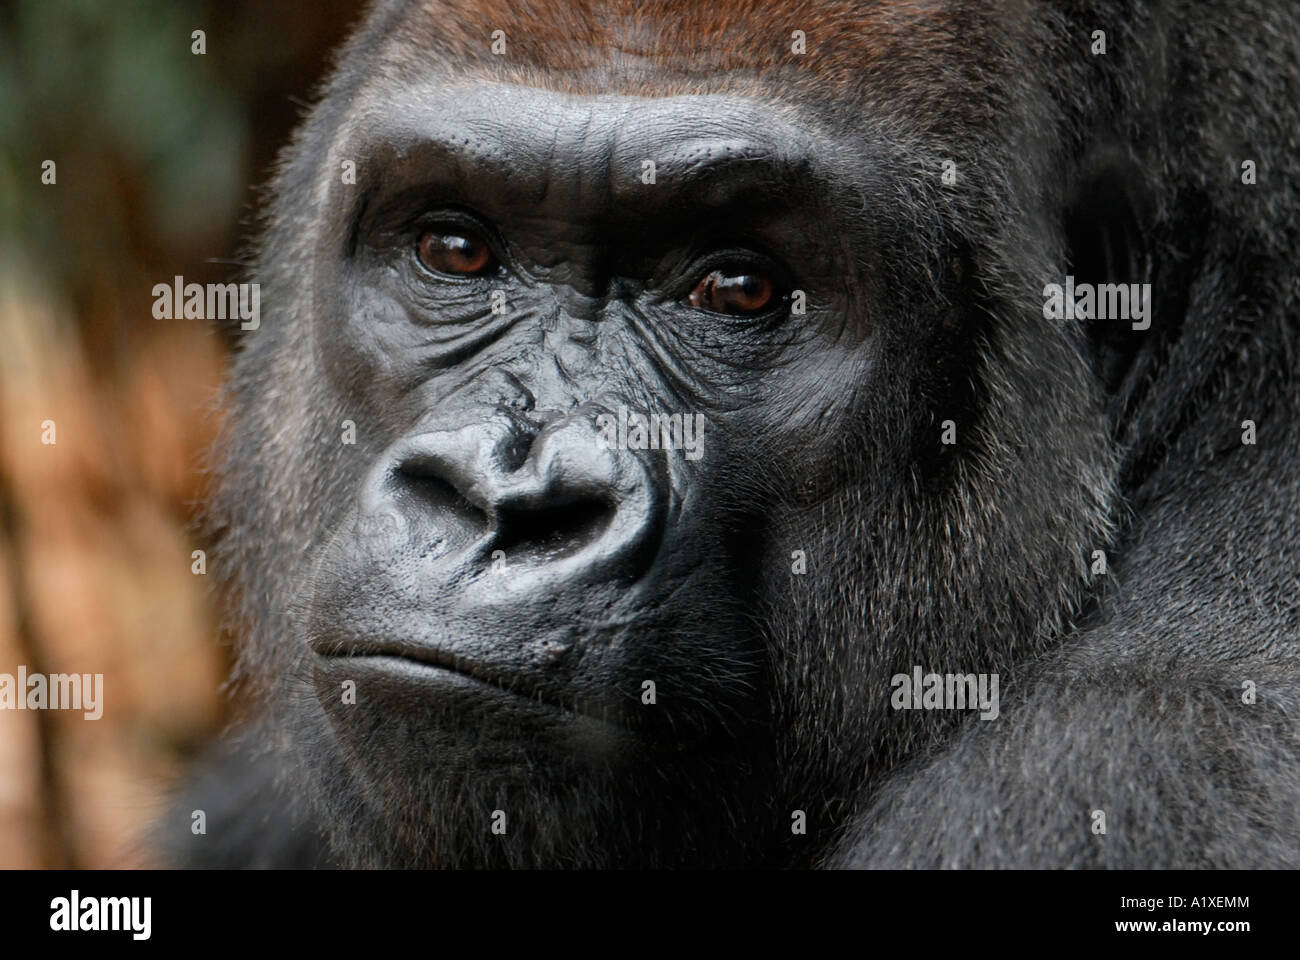 Western lowland gorilla silverback male looking at camera Stock Photo